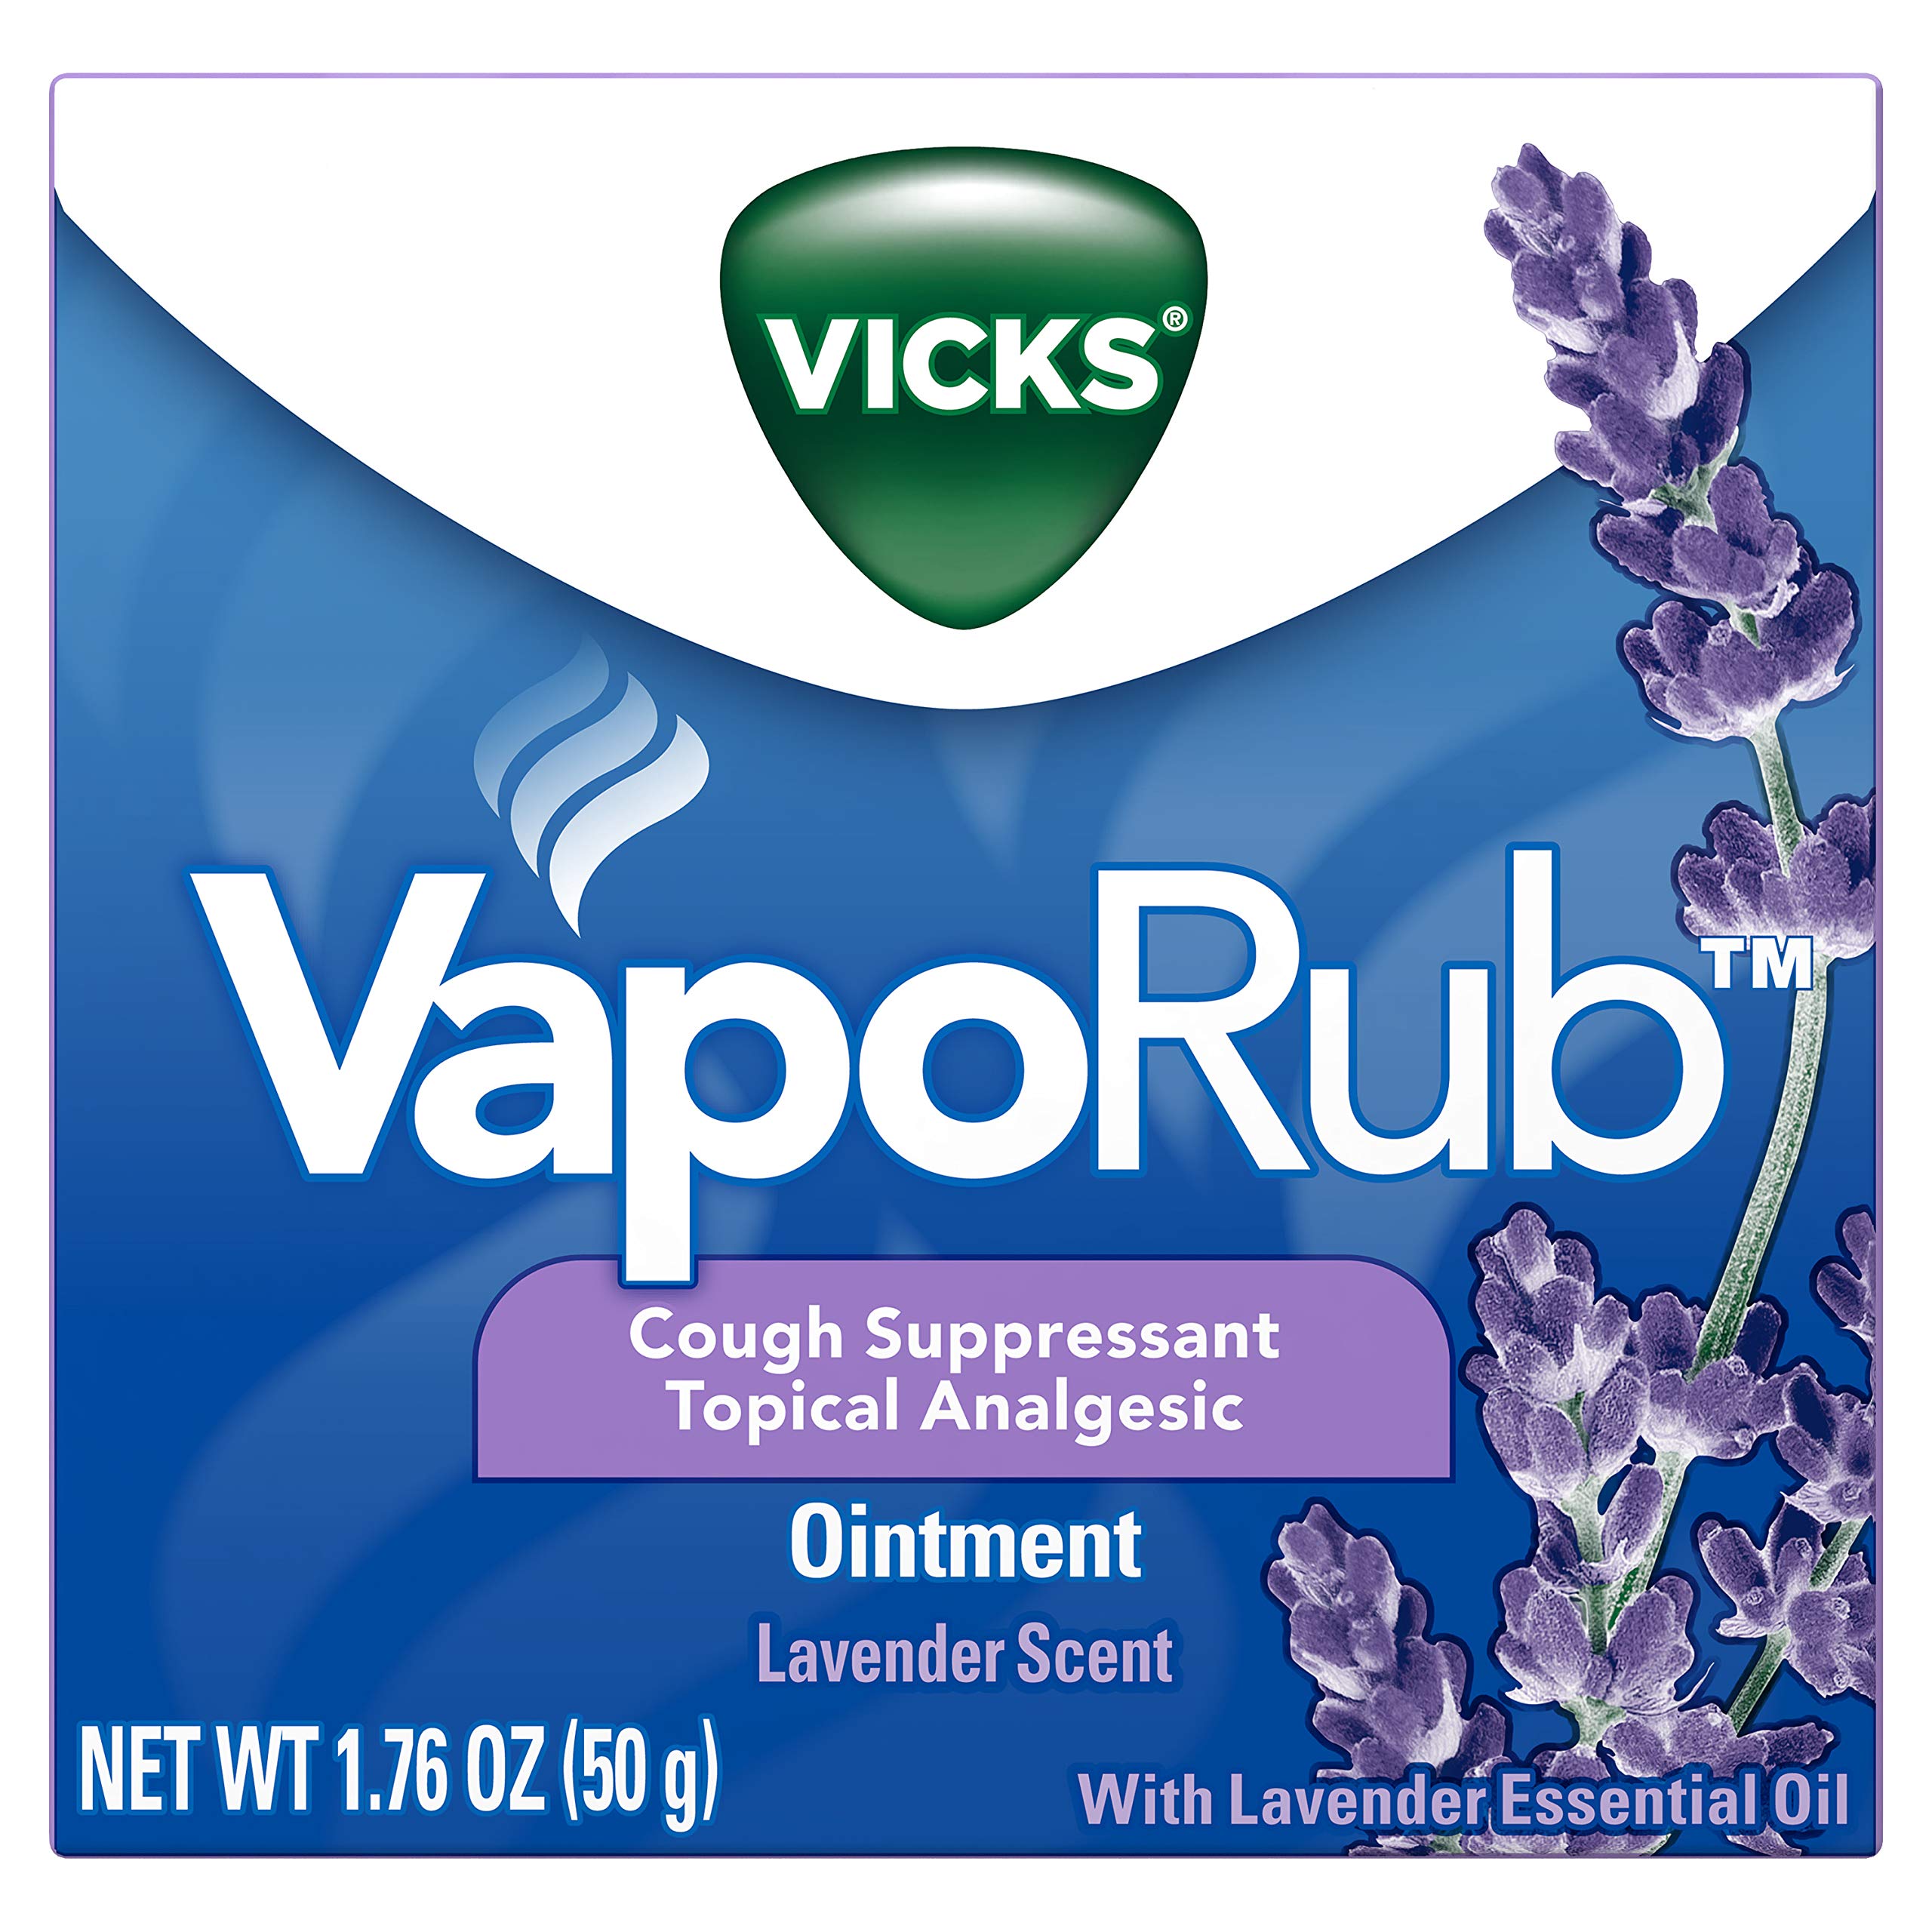 Vicks VapoRub, Lavender Scent, Cough Suppressant, Topical Chest Rub & Analgesic Ointment, Medicated Vicks Vapors, Relief From Cough Due to Cold, Aches & Pains, 1.76oz